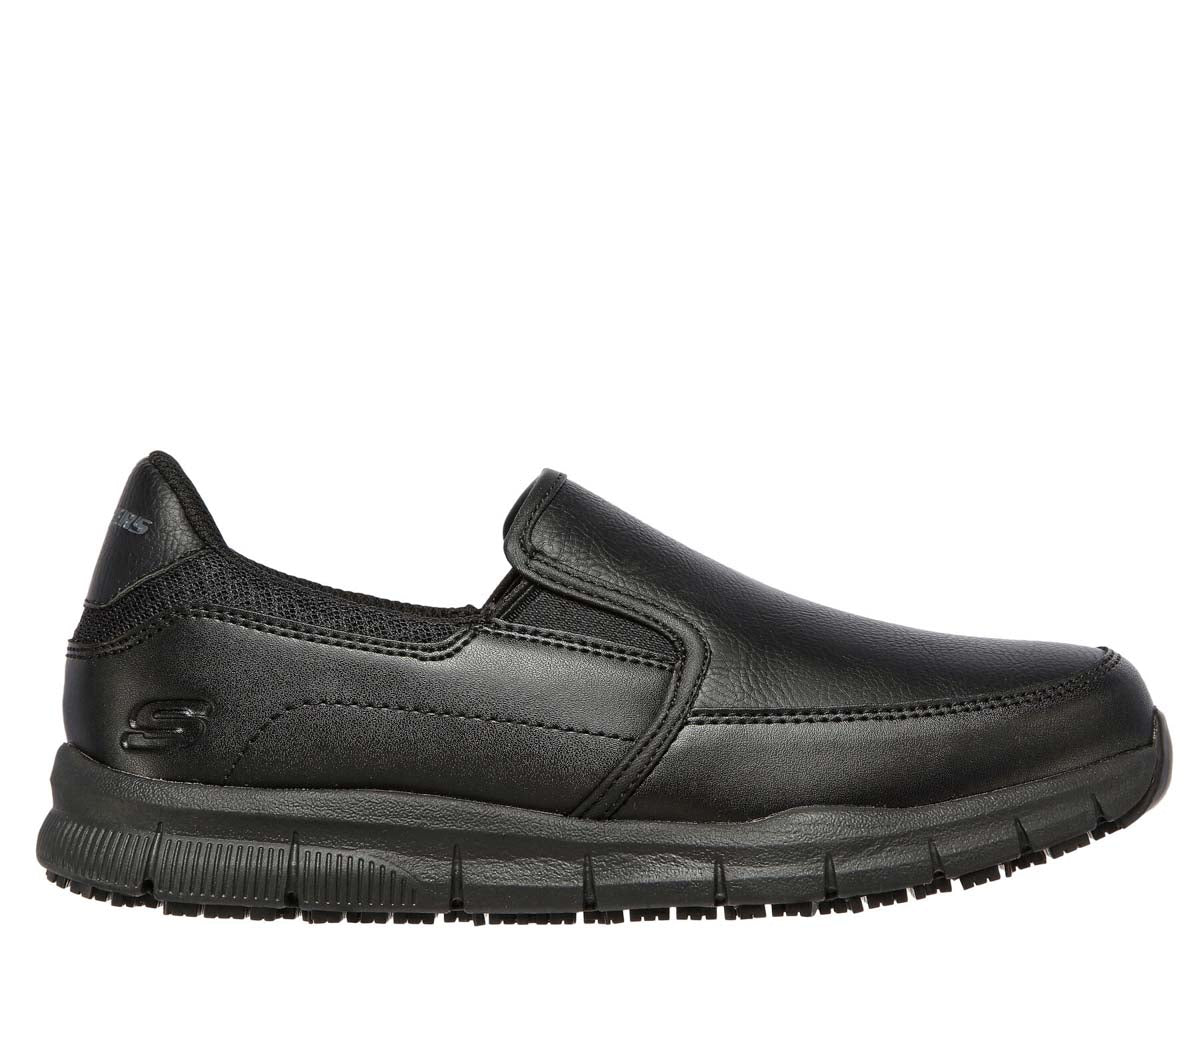     SKECHERS Work Nampa - Annod SR shoe showing the smooth leather-textured synthetic upper.